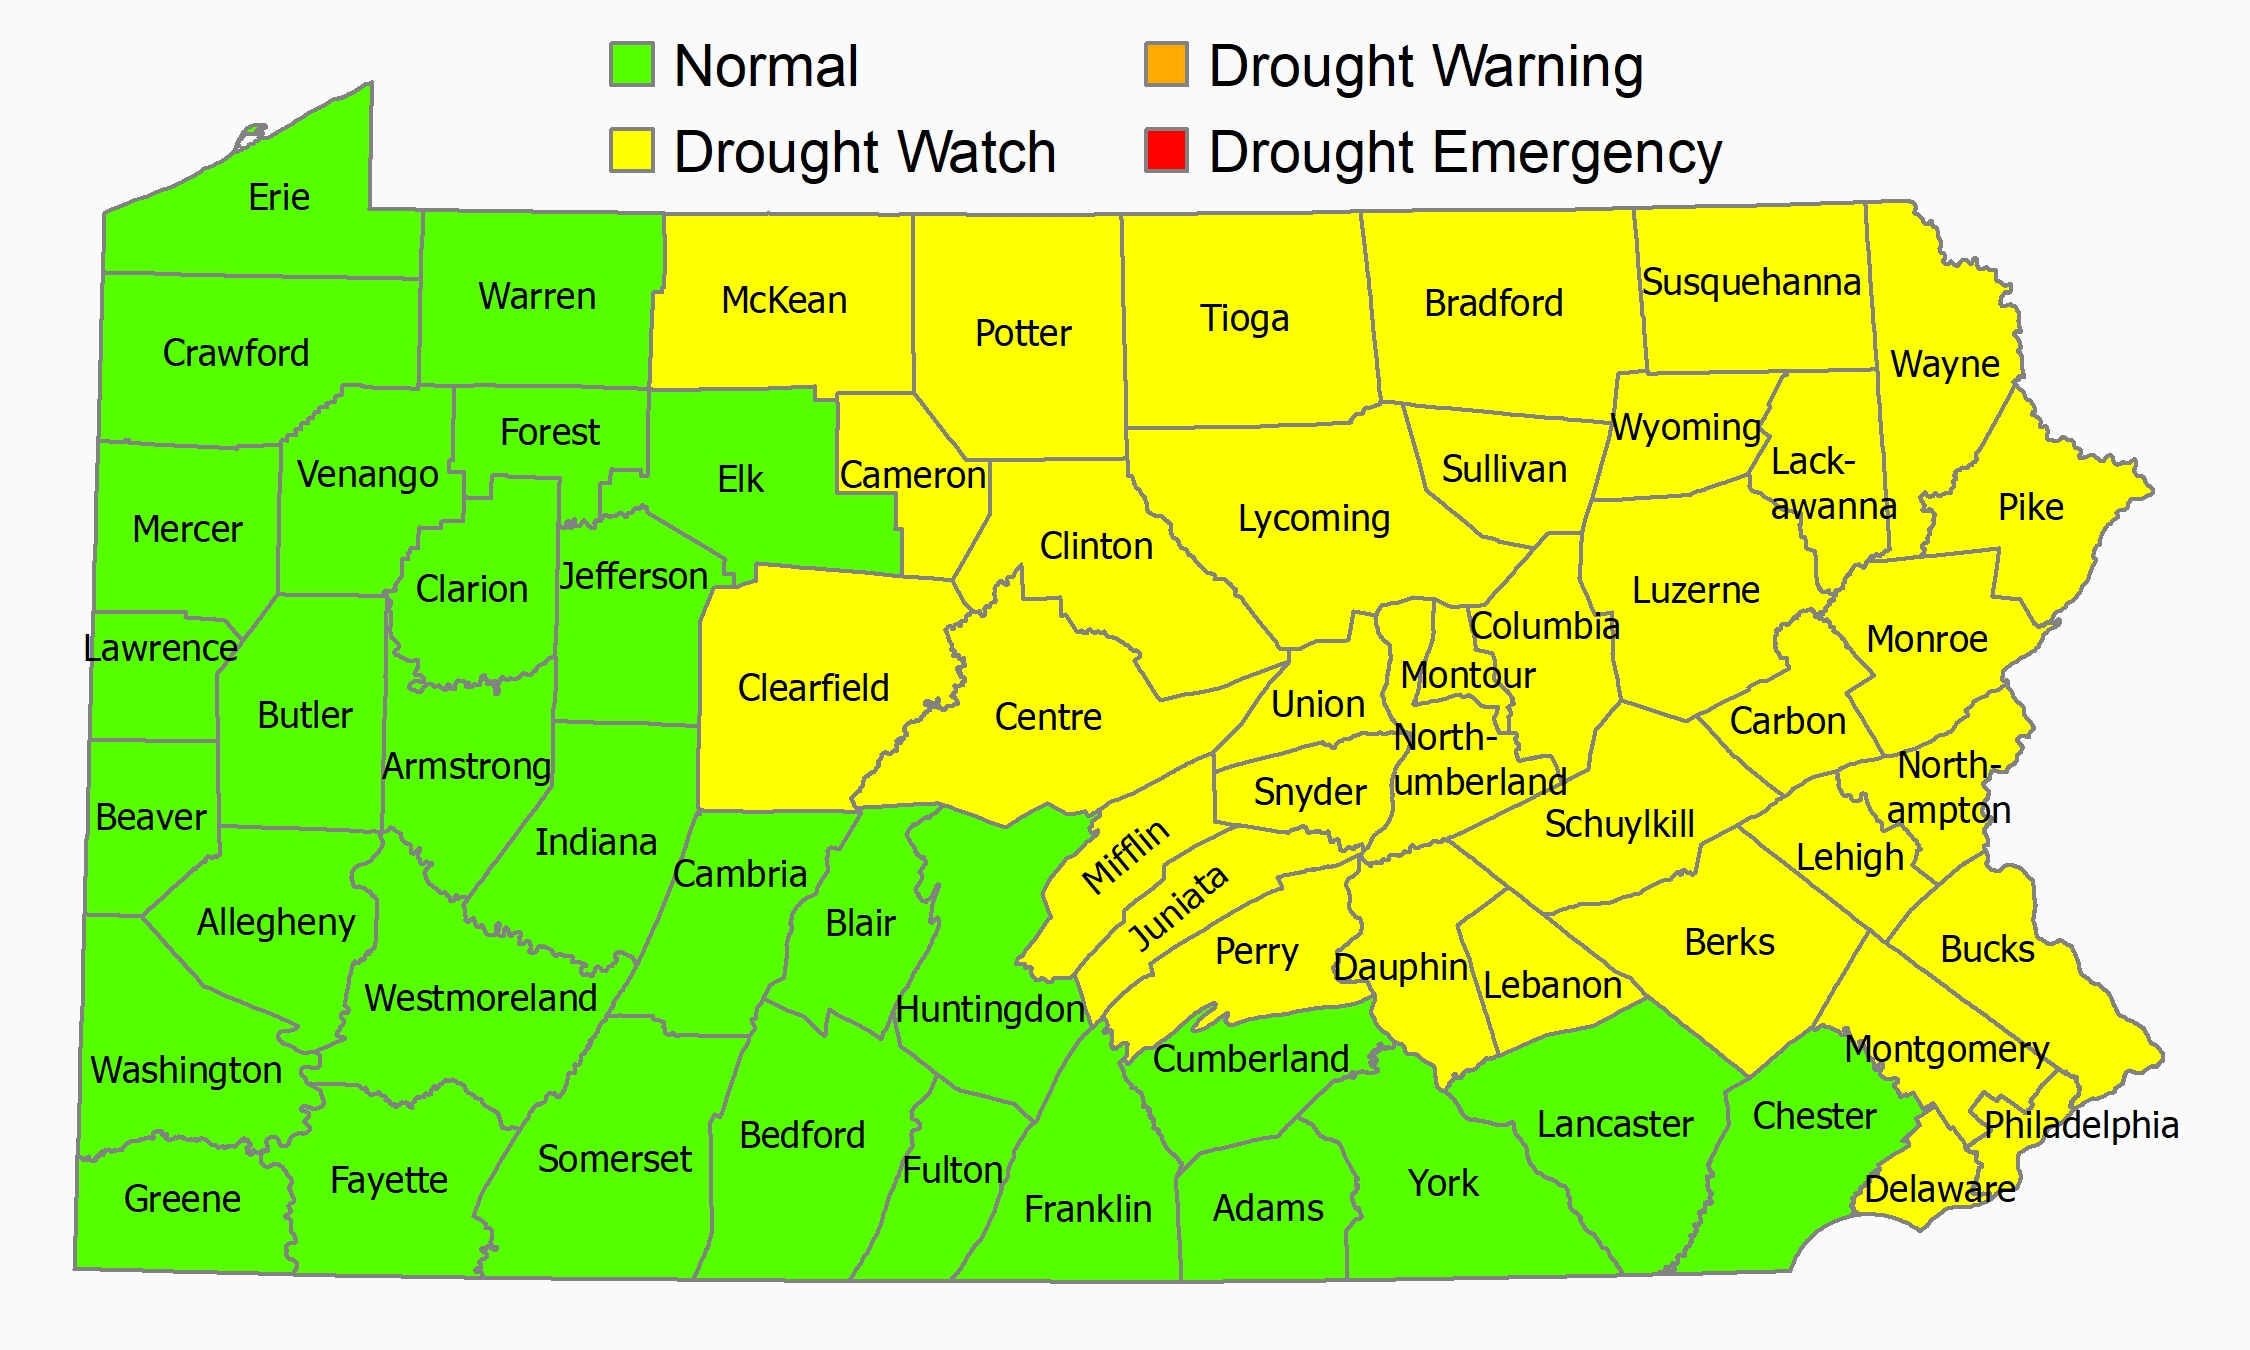 schuylkill county placed under drought watch